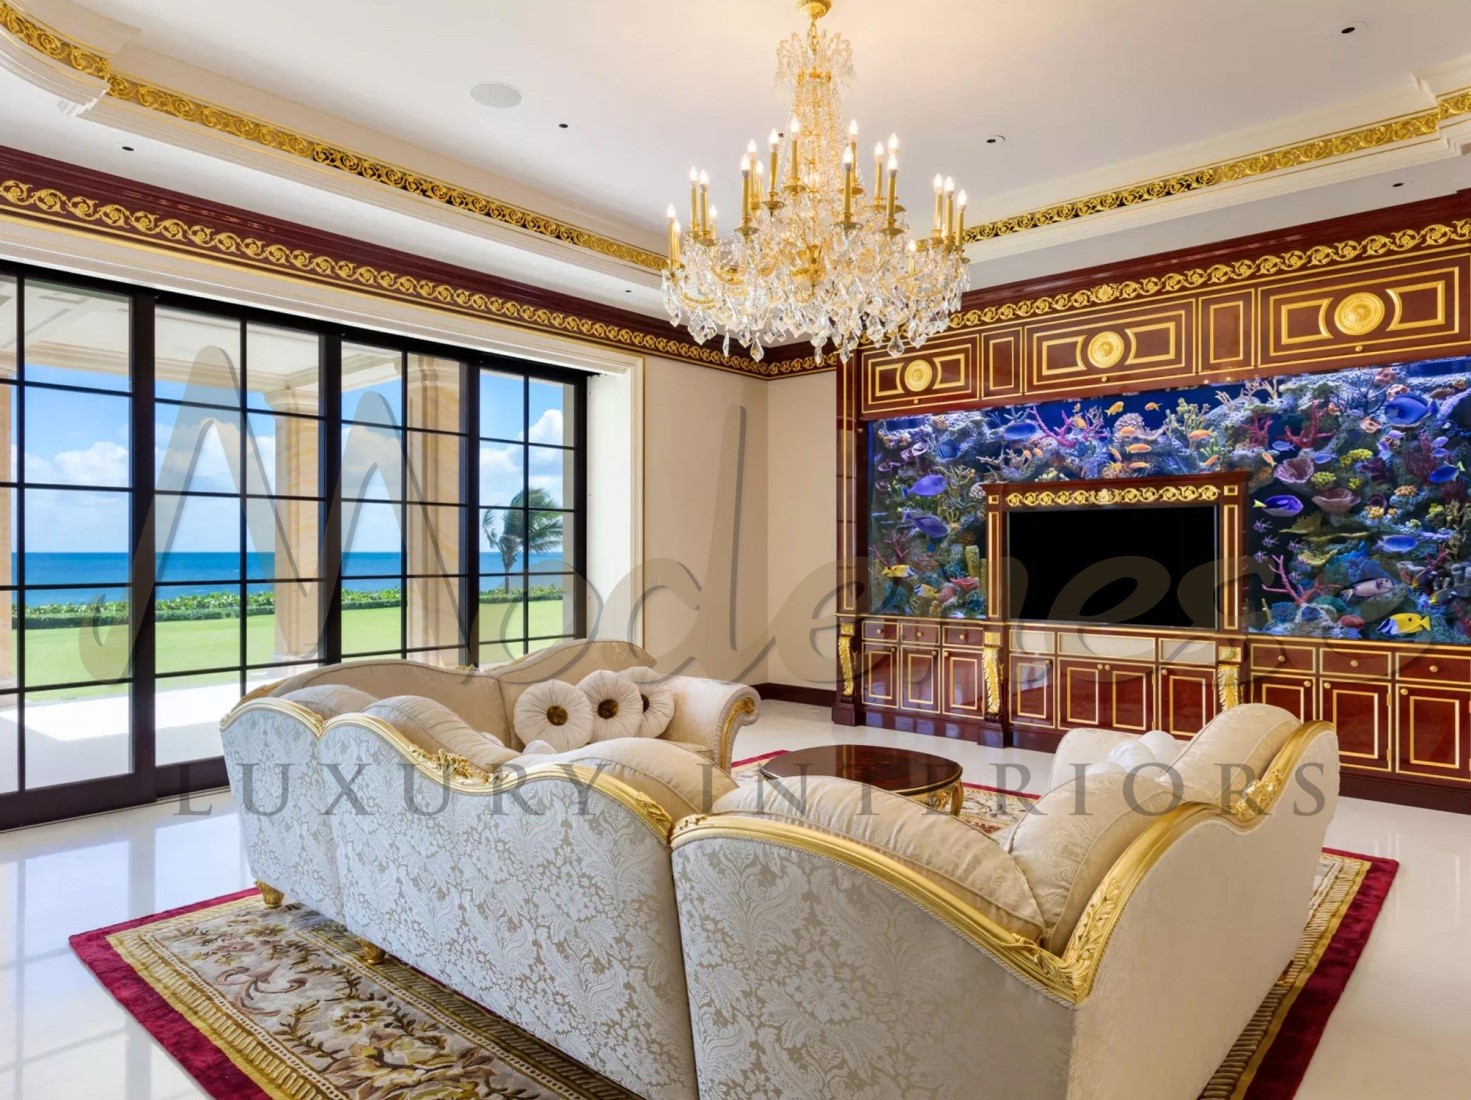 The royal style villa by best interior design company in Bahrain